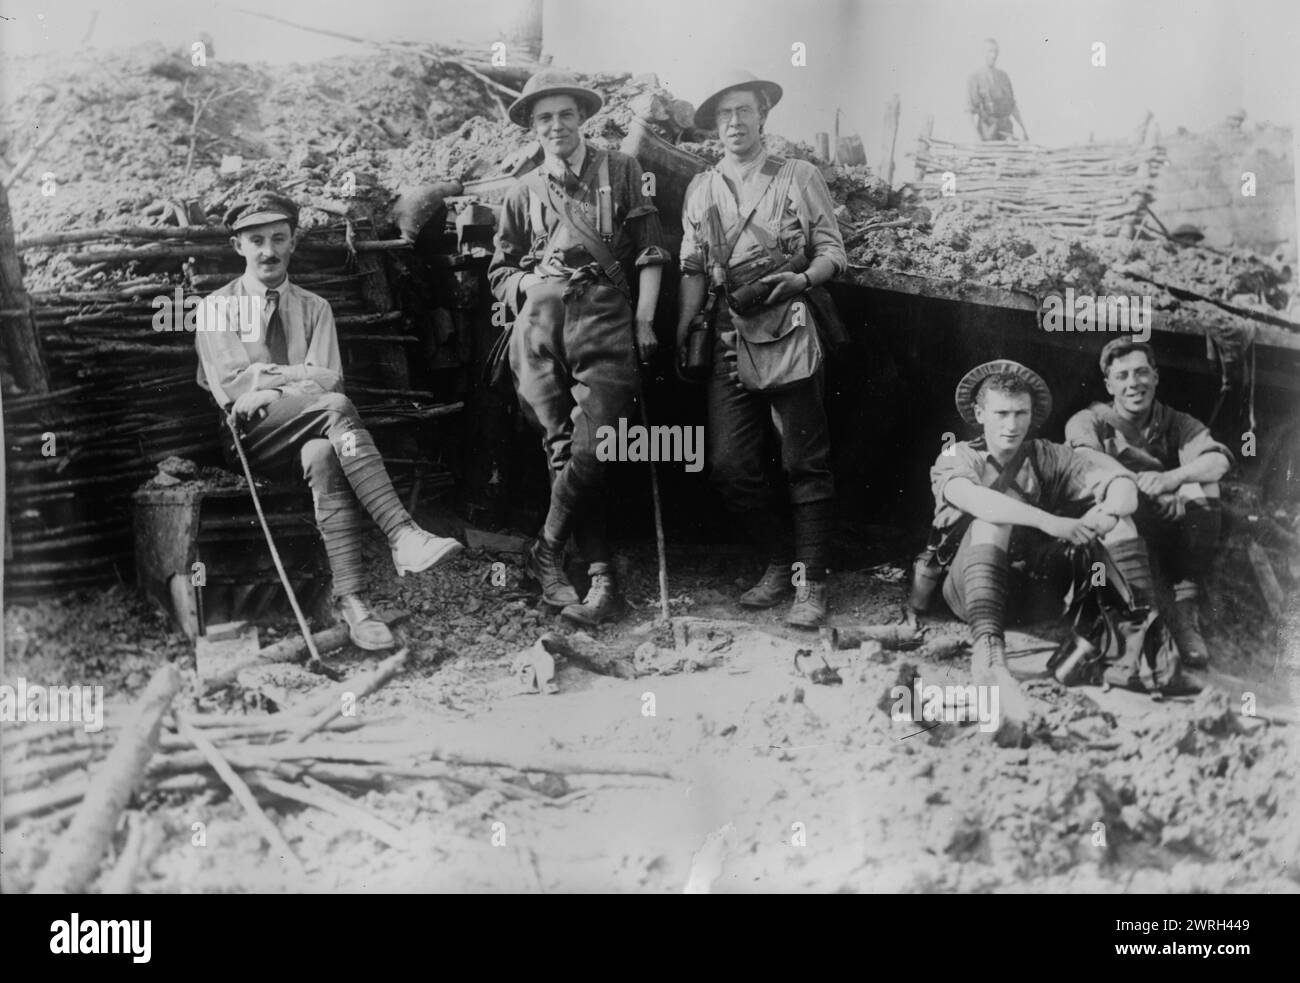 British observers in captured observation post,  6 Jun 1917. British Artillery observing officers of the Royal Artillery, in a captured German observation post near Oosttaverne Wood, Belgium during the Battle of Messines offensive, during World War I. Stock Photo